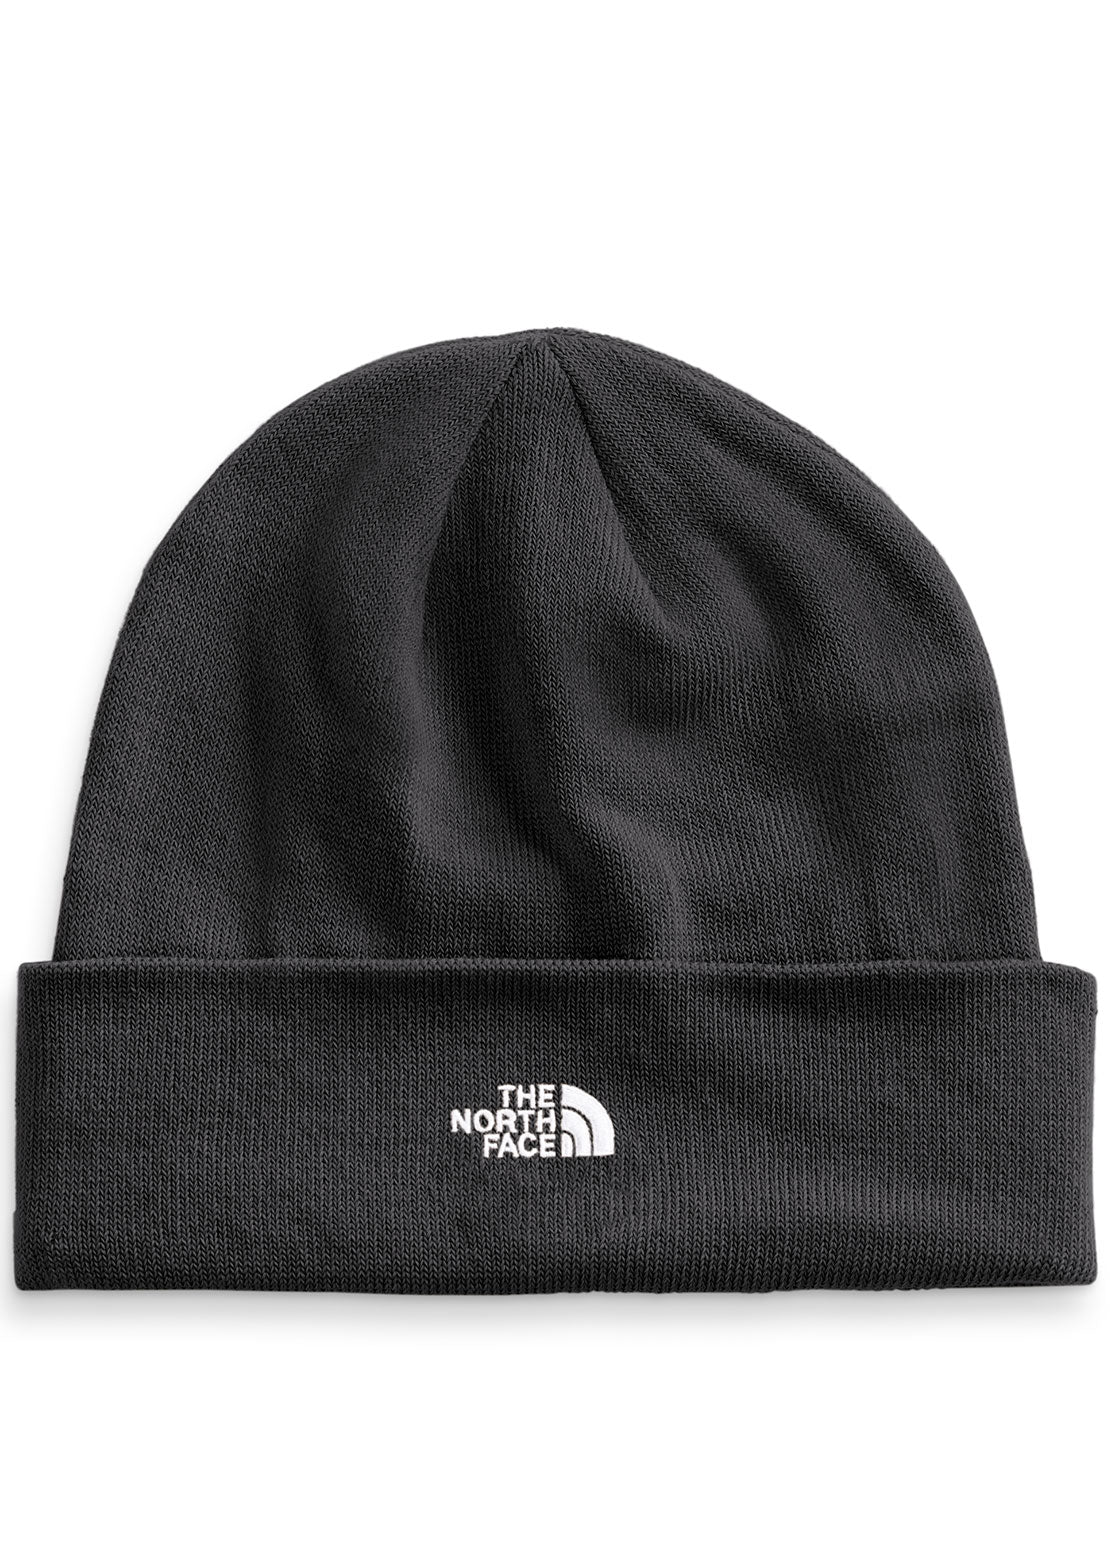 The North Face Norm Beanie Black